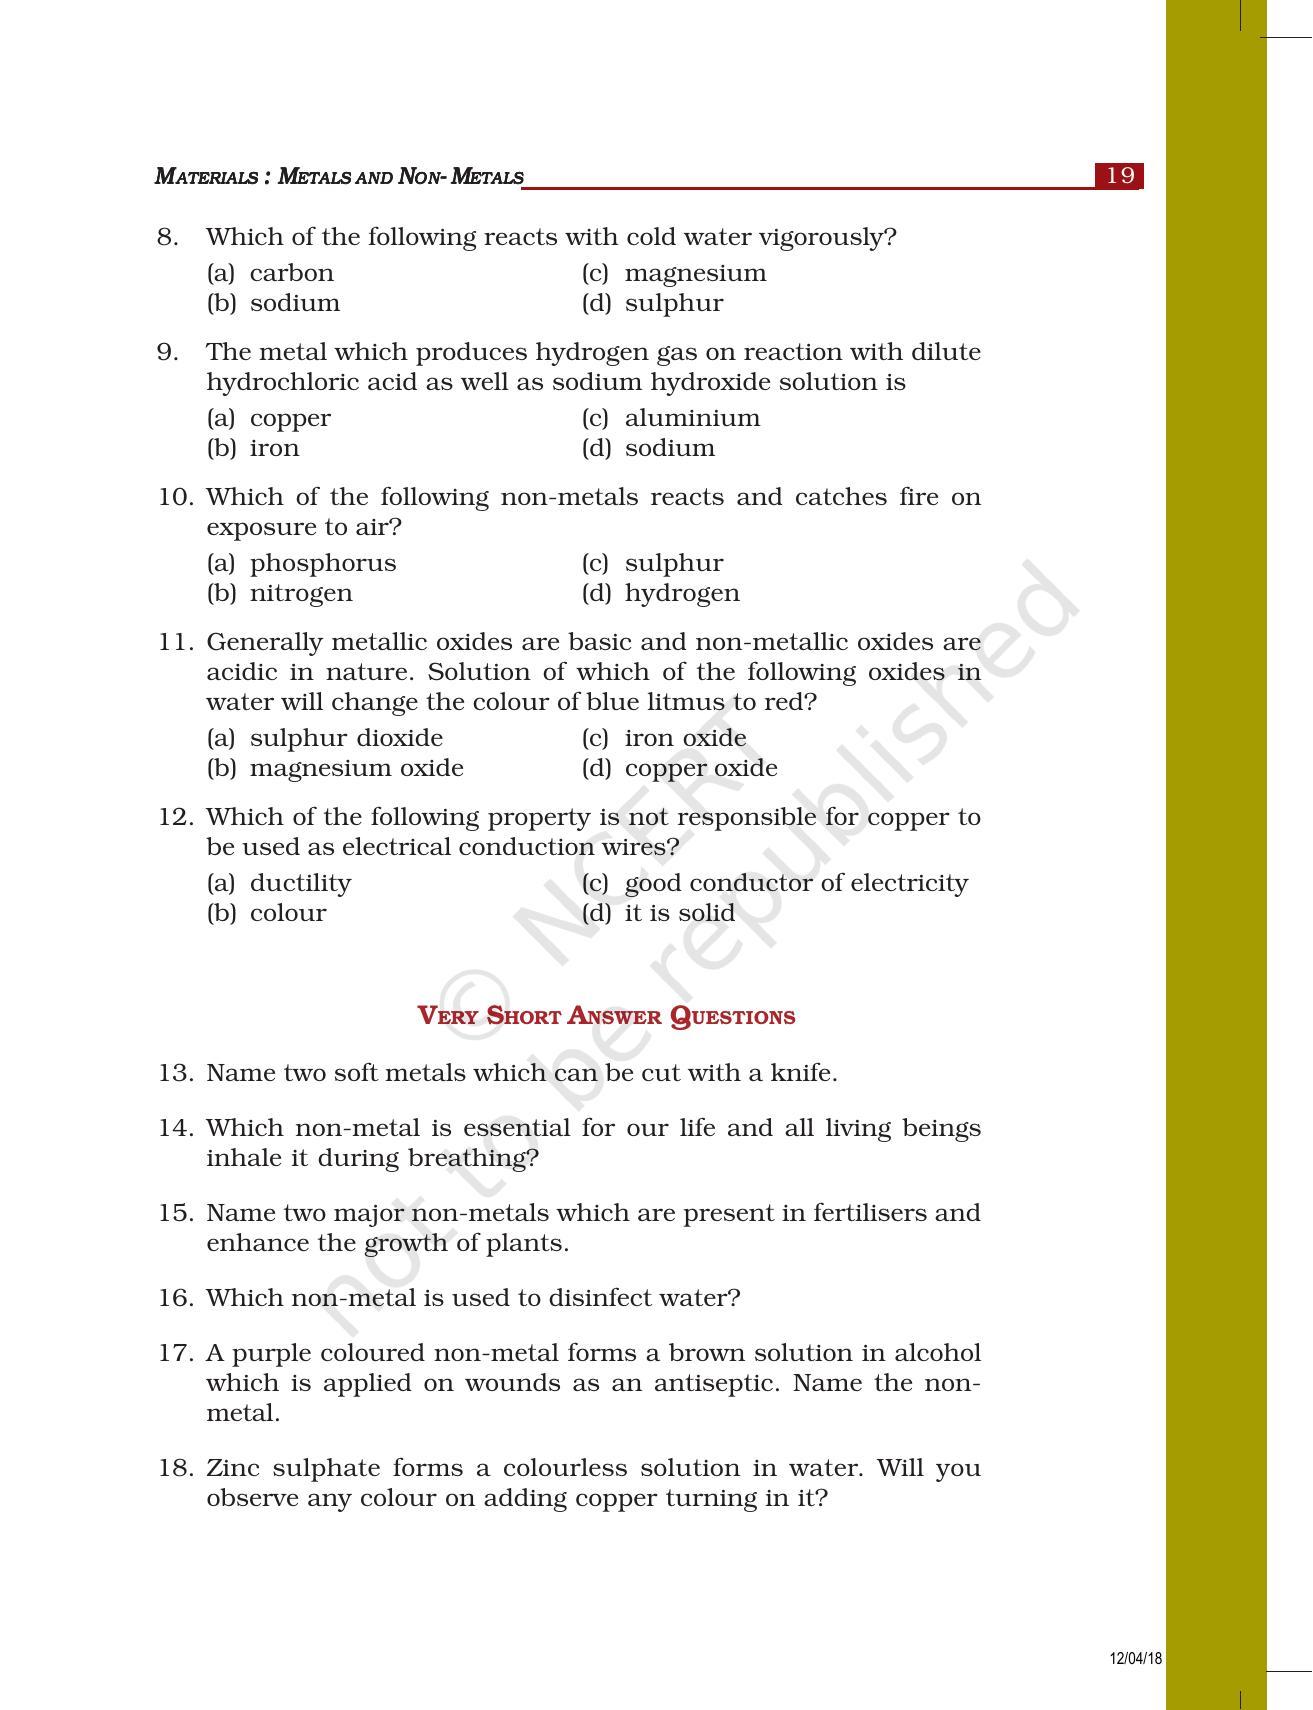 NCERT Exemplar Book for Class 8 Science: Chapter 4- Materials : Metals and Non-Metals - Page 2